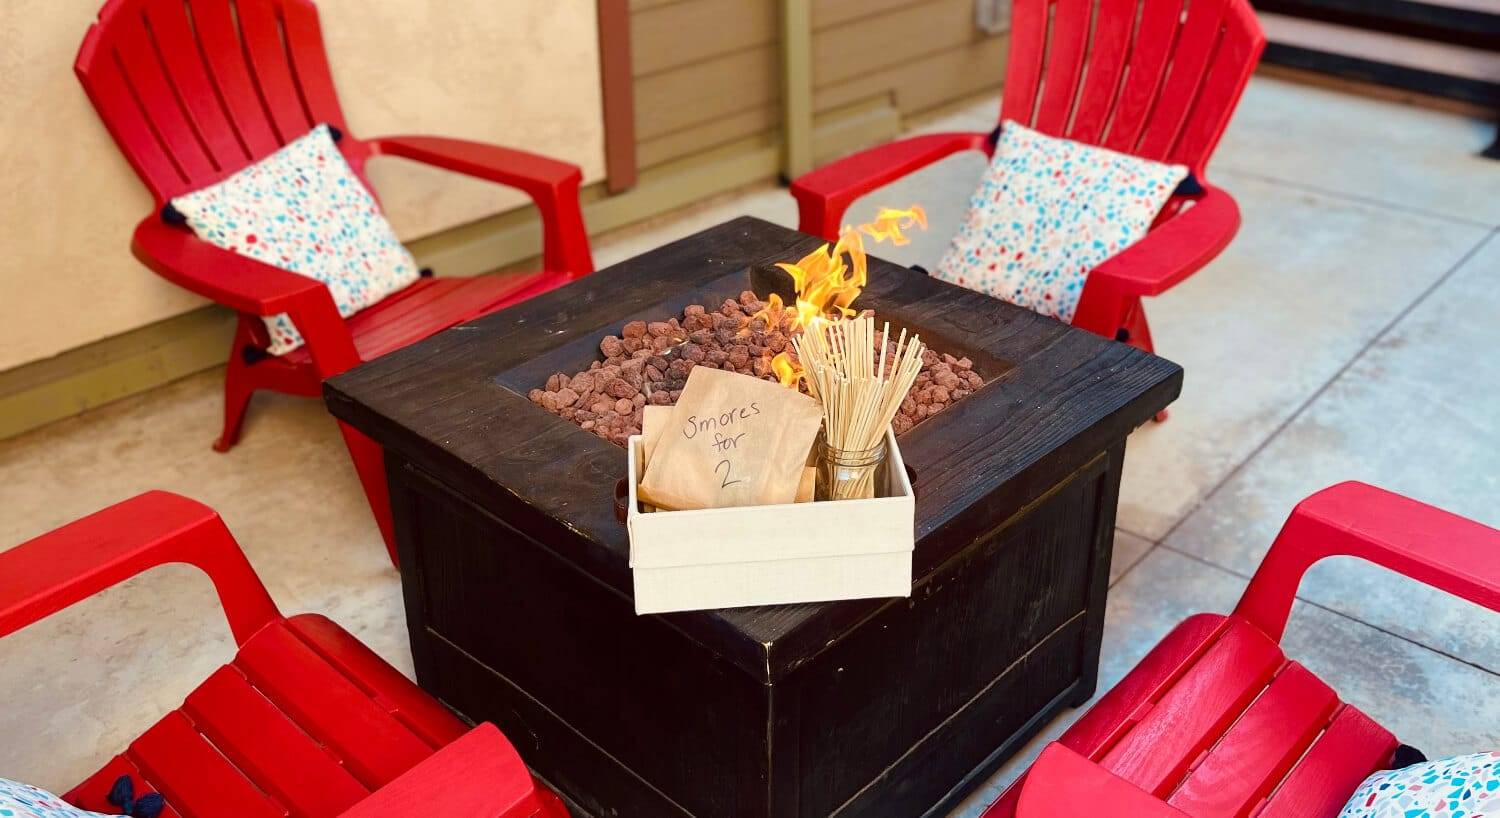 an outdoor square firepit with a s'mores kit on one edge, and 4 red chairs around it.